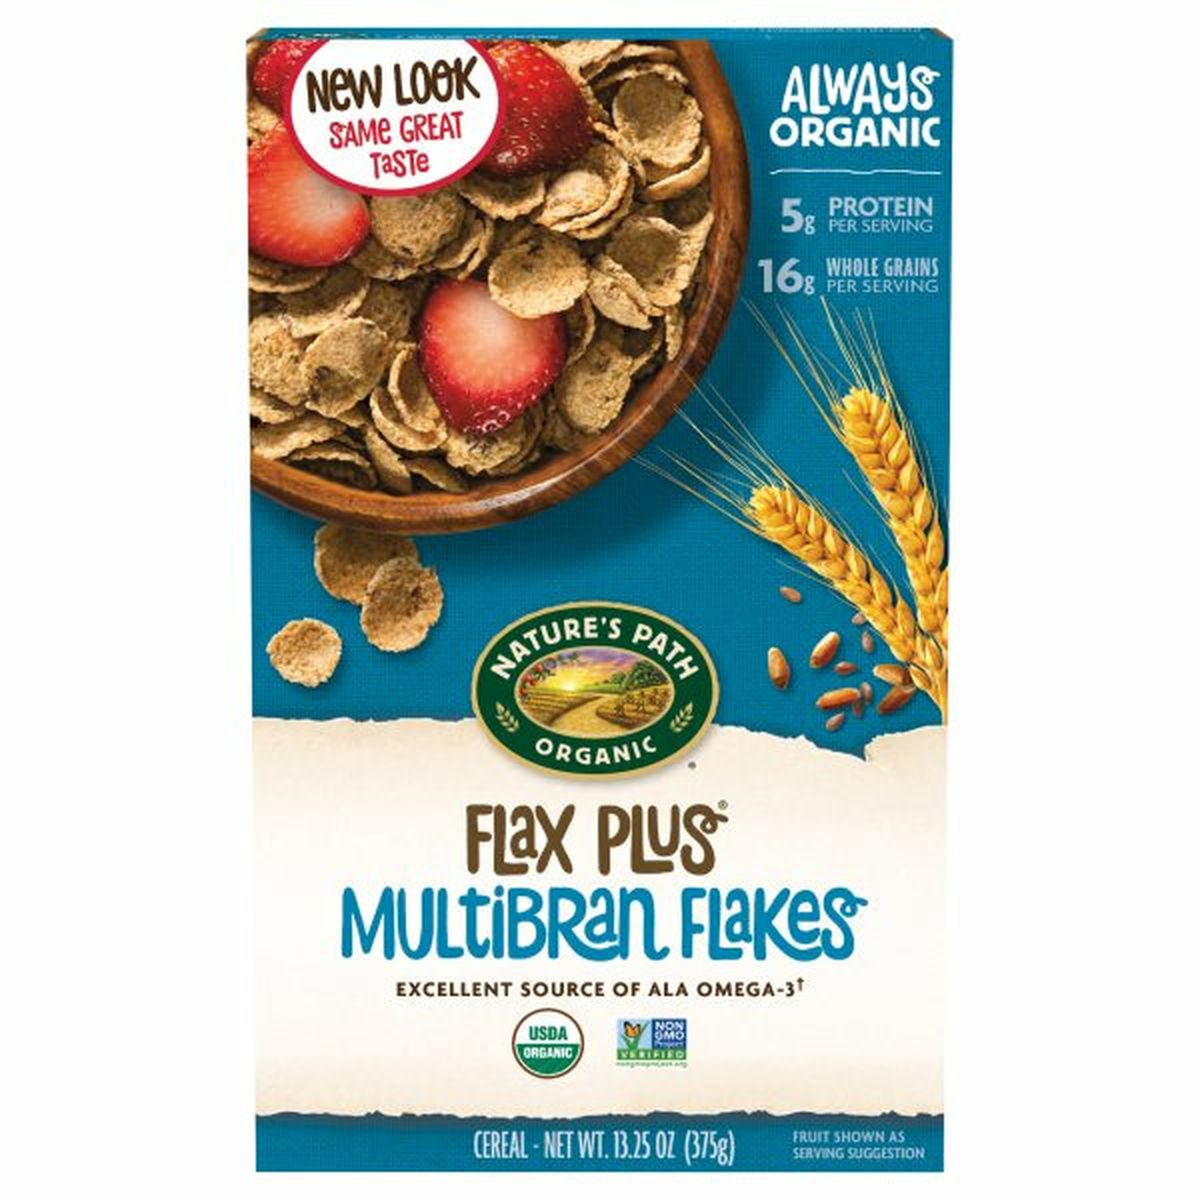 Calories in Nature's Path Cereal, Multibran Flakes, Flax Plus